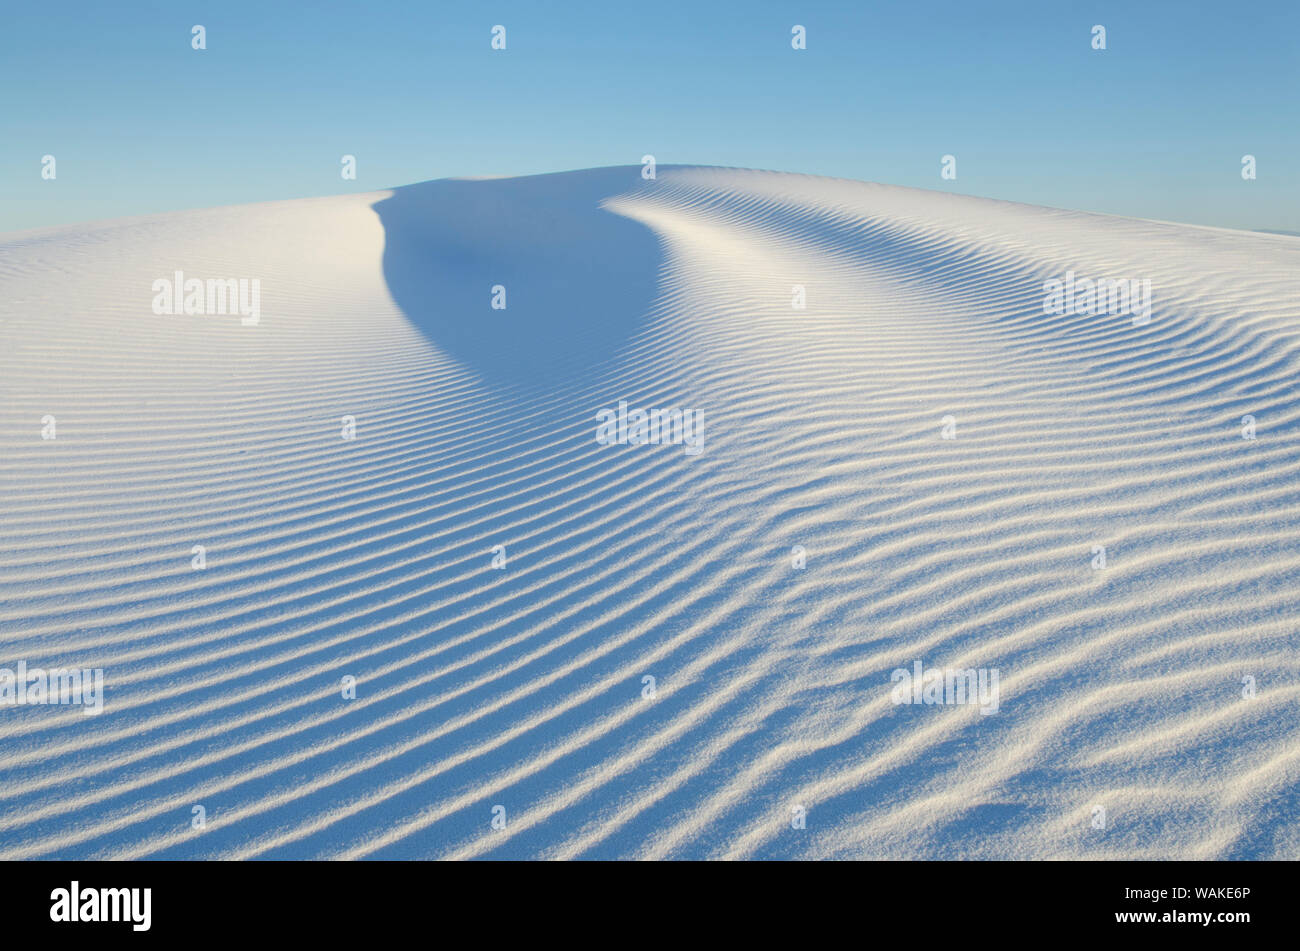 Ripple patterns in gypsum sand dunes, White Sands National Monument, New Mexico Stock Photo